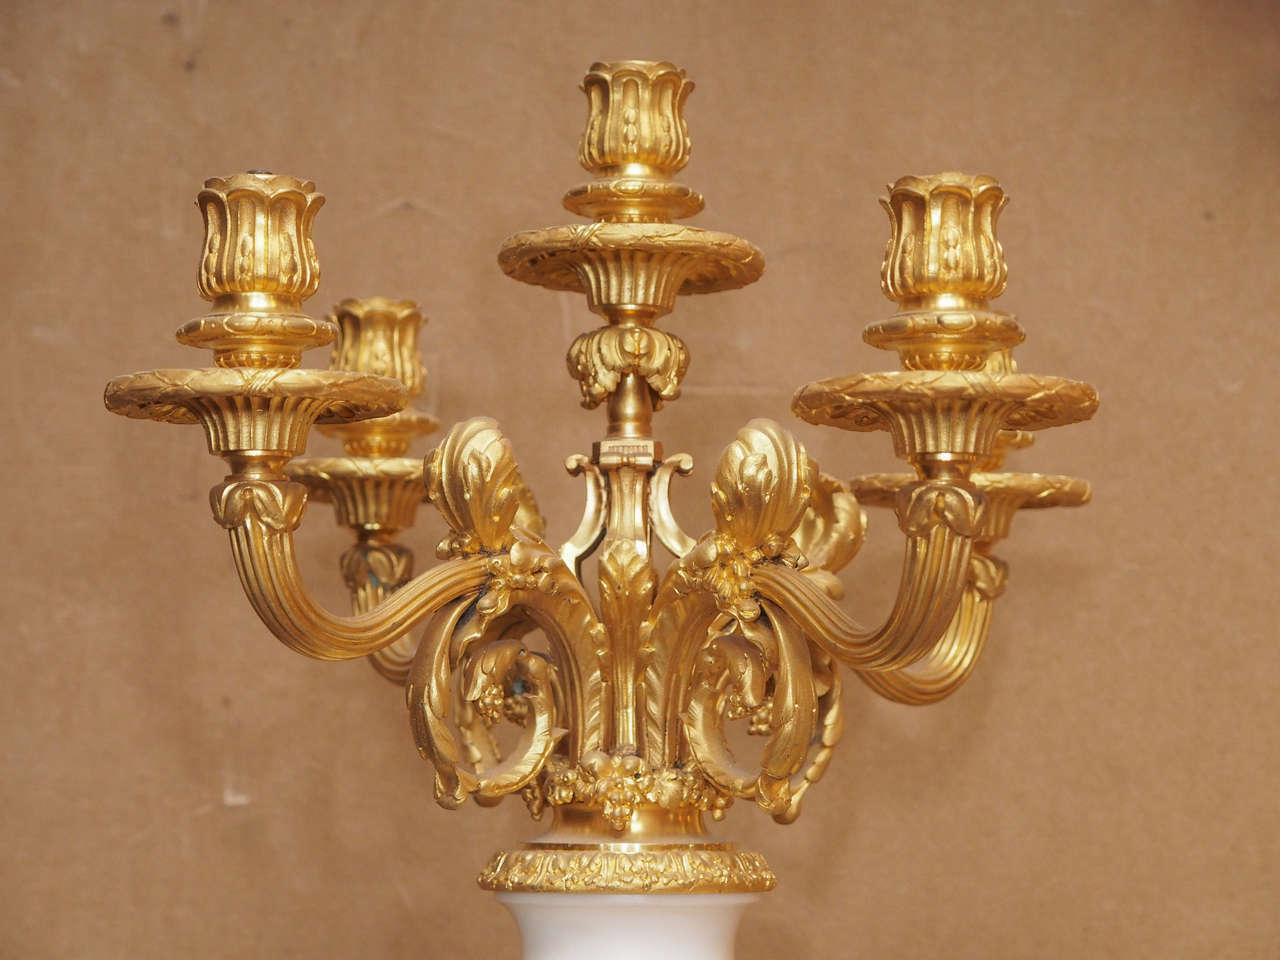 Pair of Antique Carrara Marble and Ormolu Pedestals and Urns circa 1850 In Good Condition For Sale In New Orleans, LA